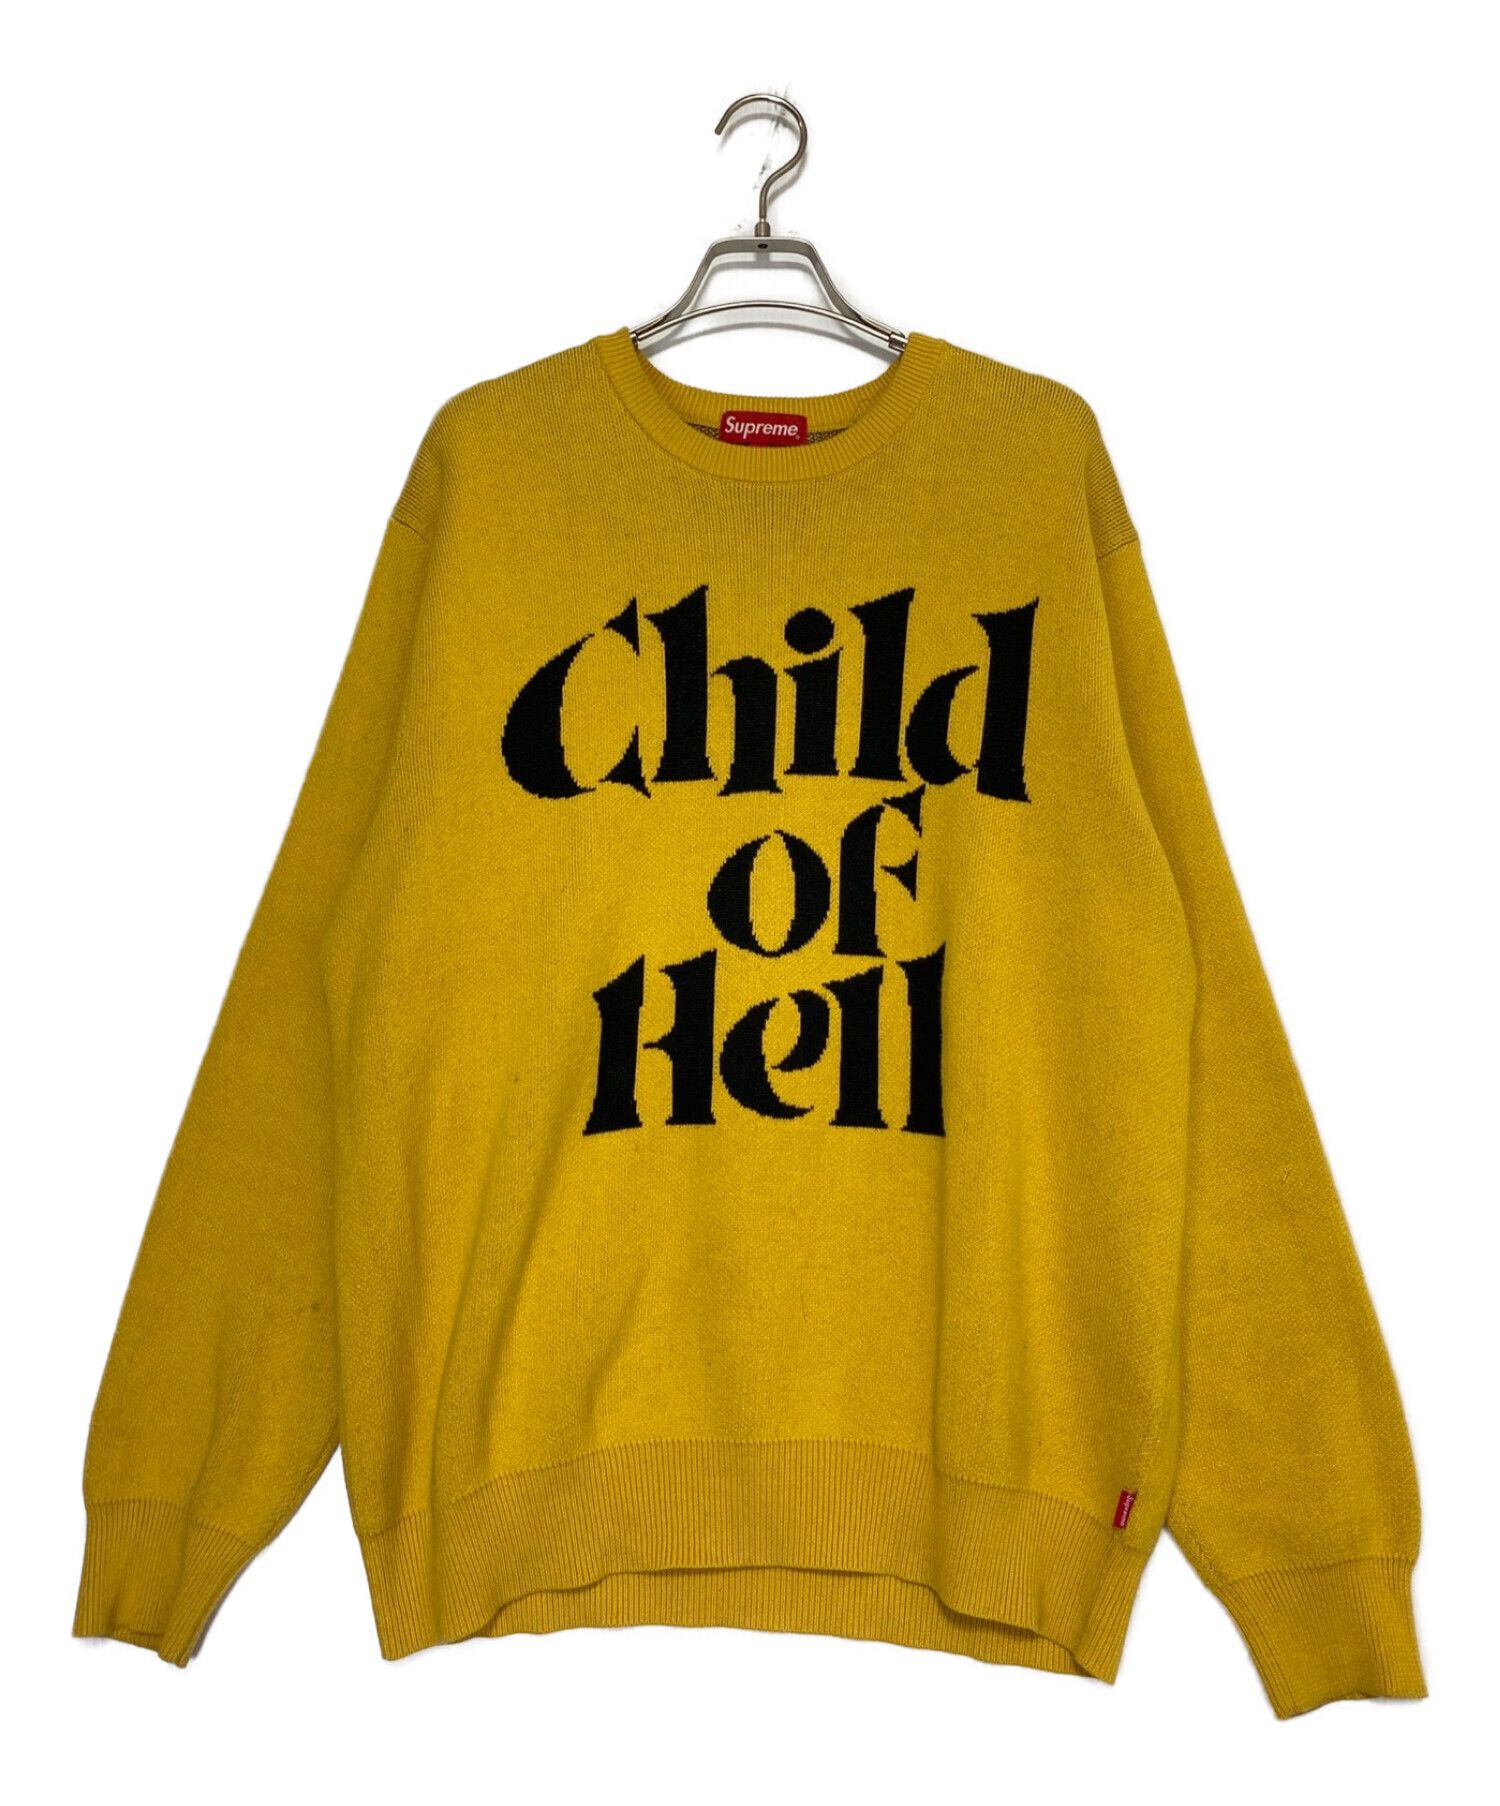 Supreme Child of hell sweater XL-